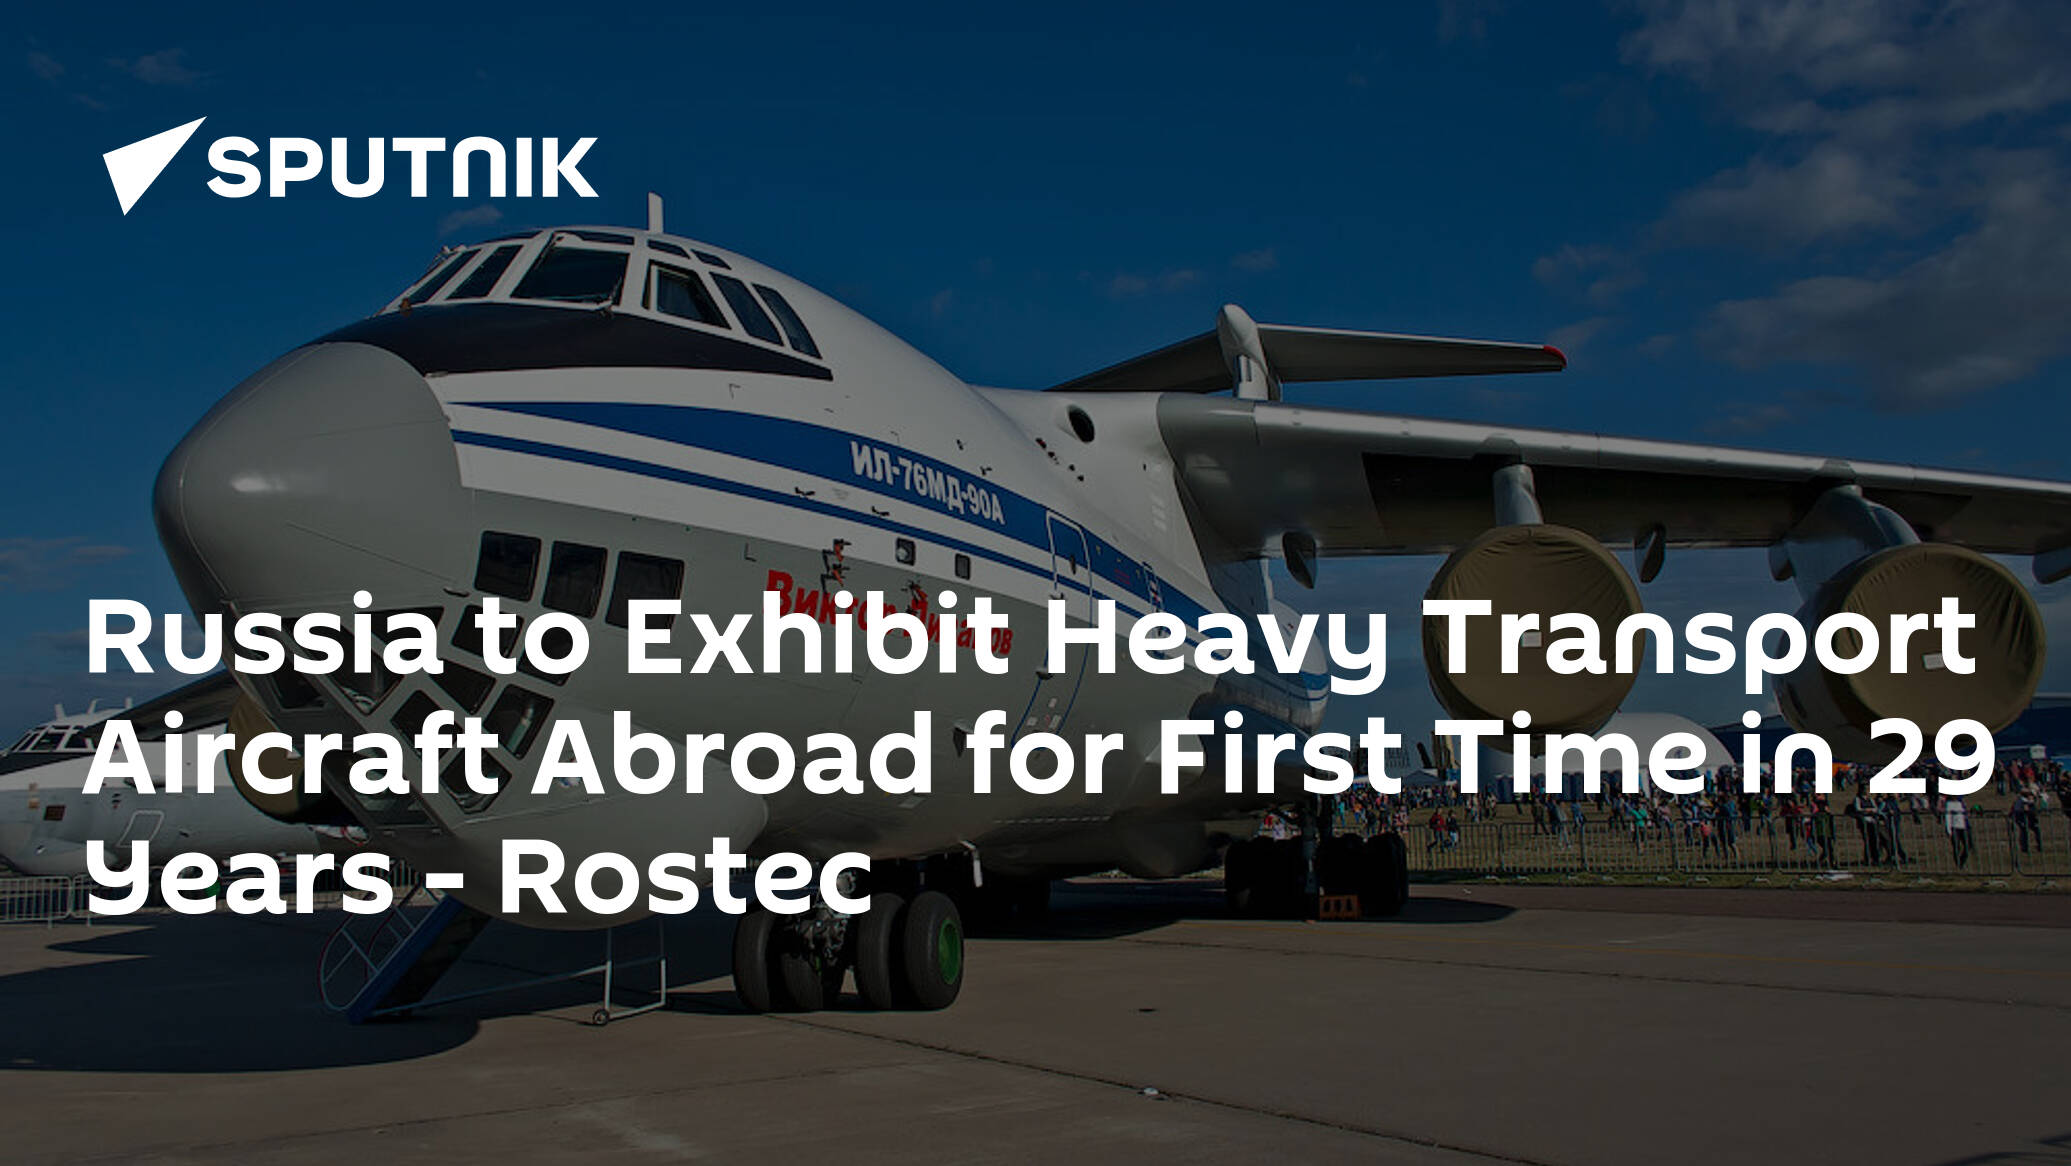 Russia to Exhibit Heavy Transport Aircraft Abroad for First Time in 29 Years – Rostec